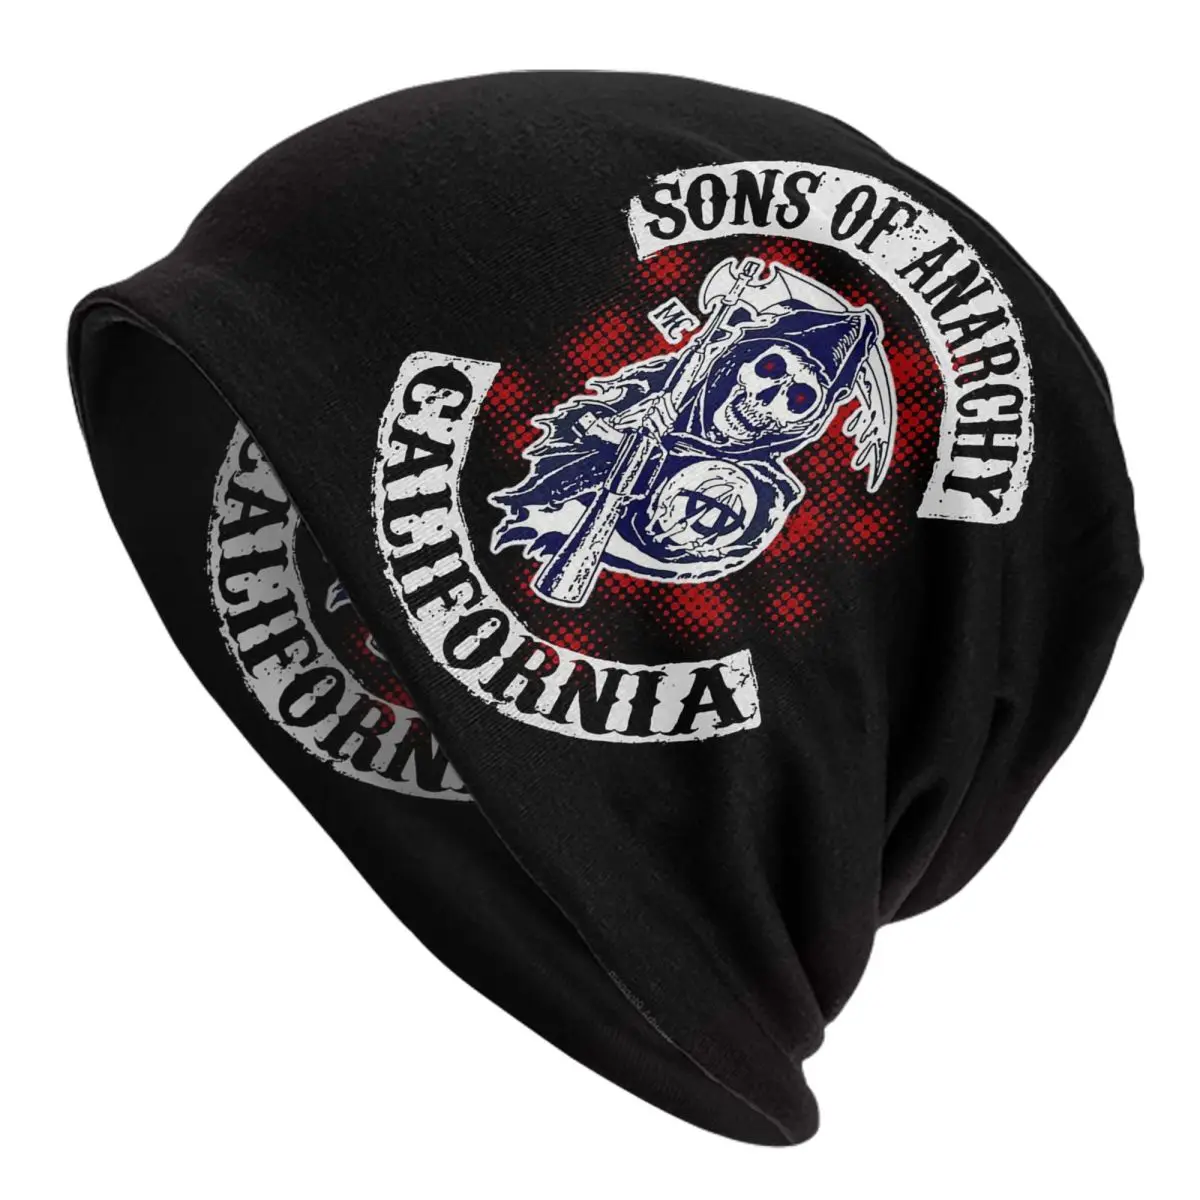 

SOA Sons Of Anarchy Skullies Beanies Hat the Death Fear the Reaper Men Women Outdoor Cap Warm Dual-use Bonnet Knitted Hat